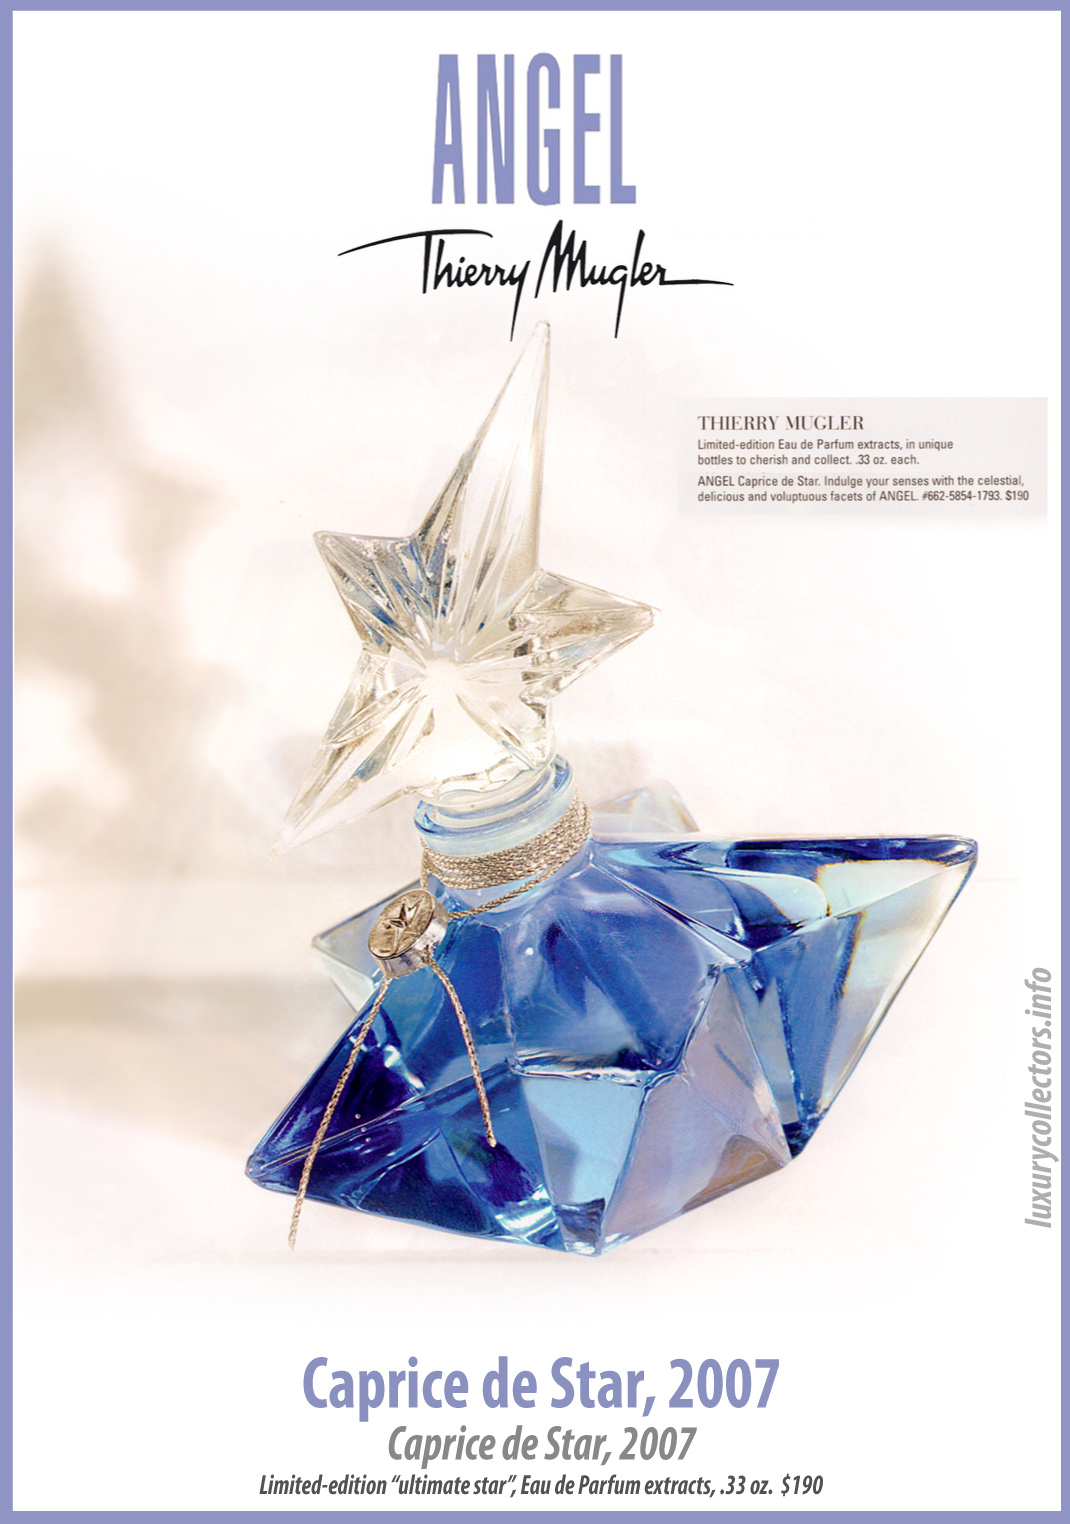 Thierry Mugler Angel Perfume Caprice de Star Ultimate Star (Etoile), 2007. Perfume Bottle Collecting